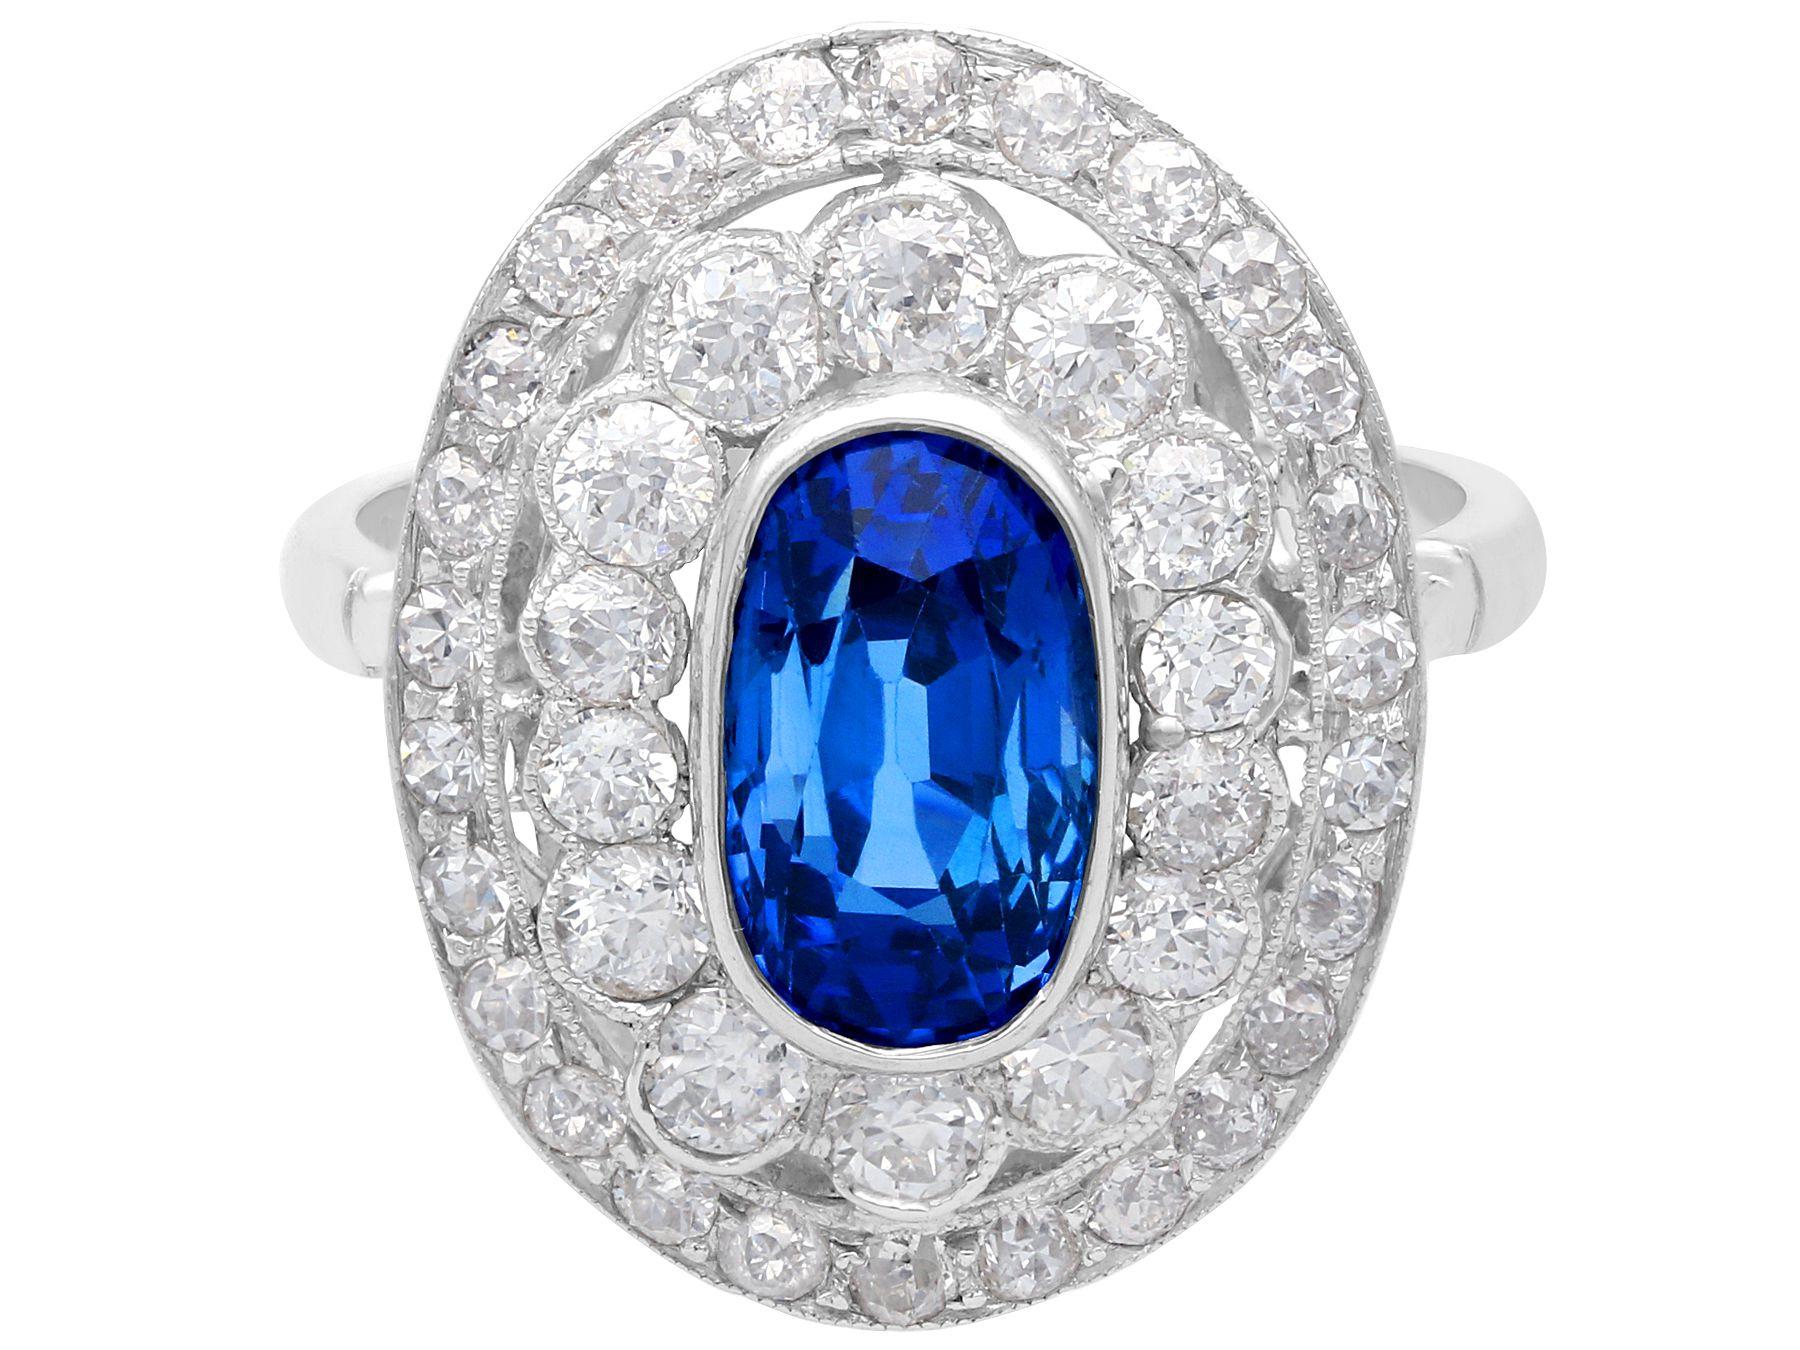 Antique 3.50 Carat Ceylon Sapphire and 2.48 Carat Diamond Platinum Cocktail Ring In Excellent Condition For Sale In Jesmond, Newcastle Upon Tyne